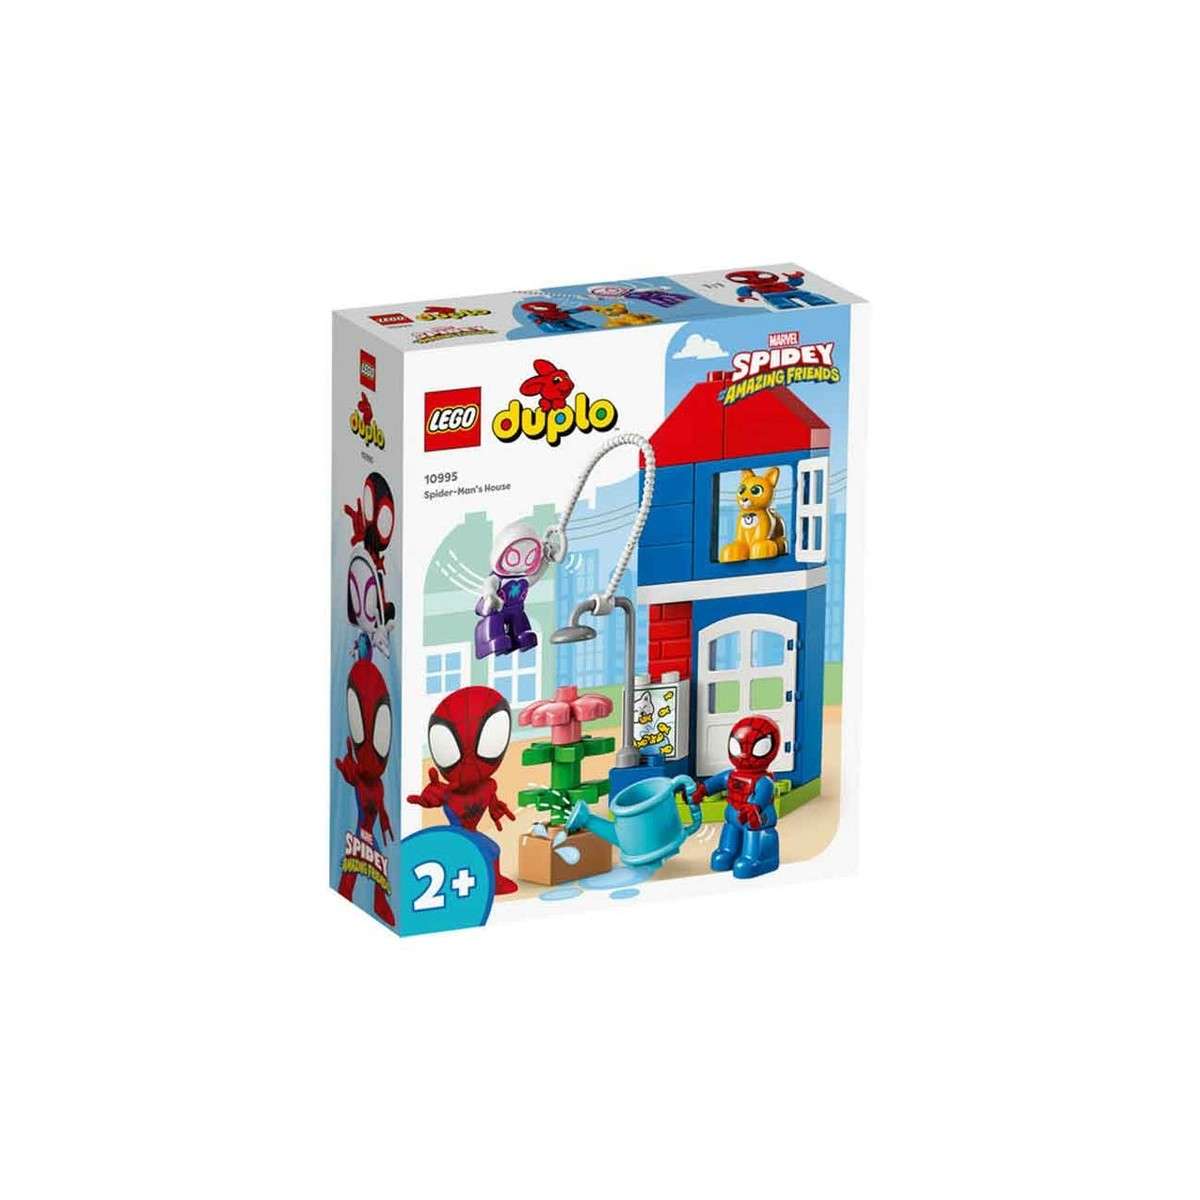 LEGO DUPLO: Spider-Man's House - Building Set for Fun!